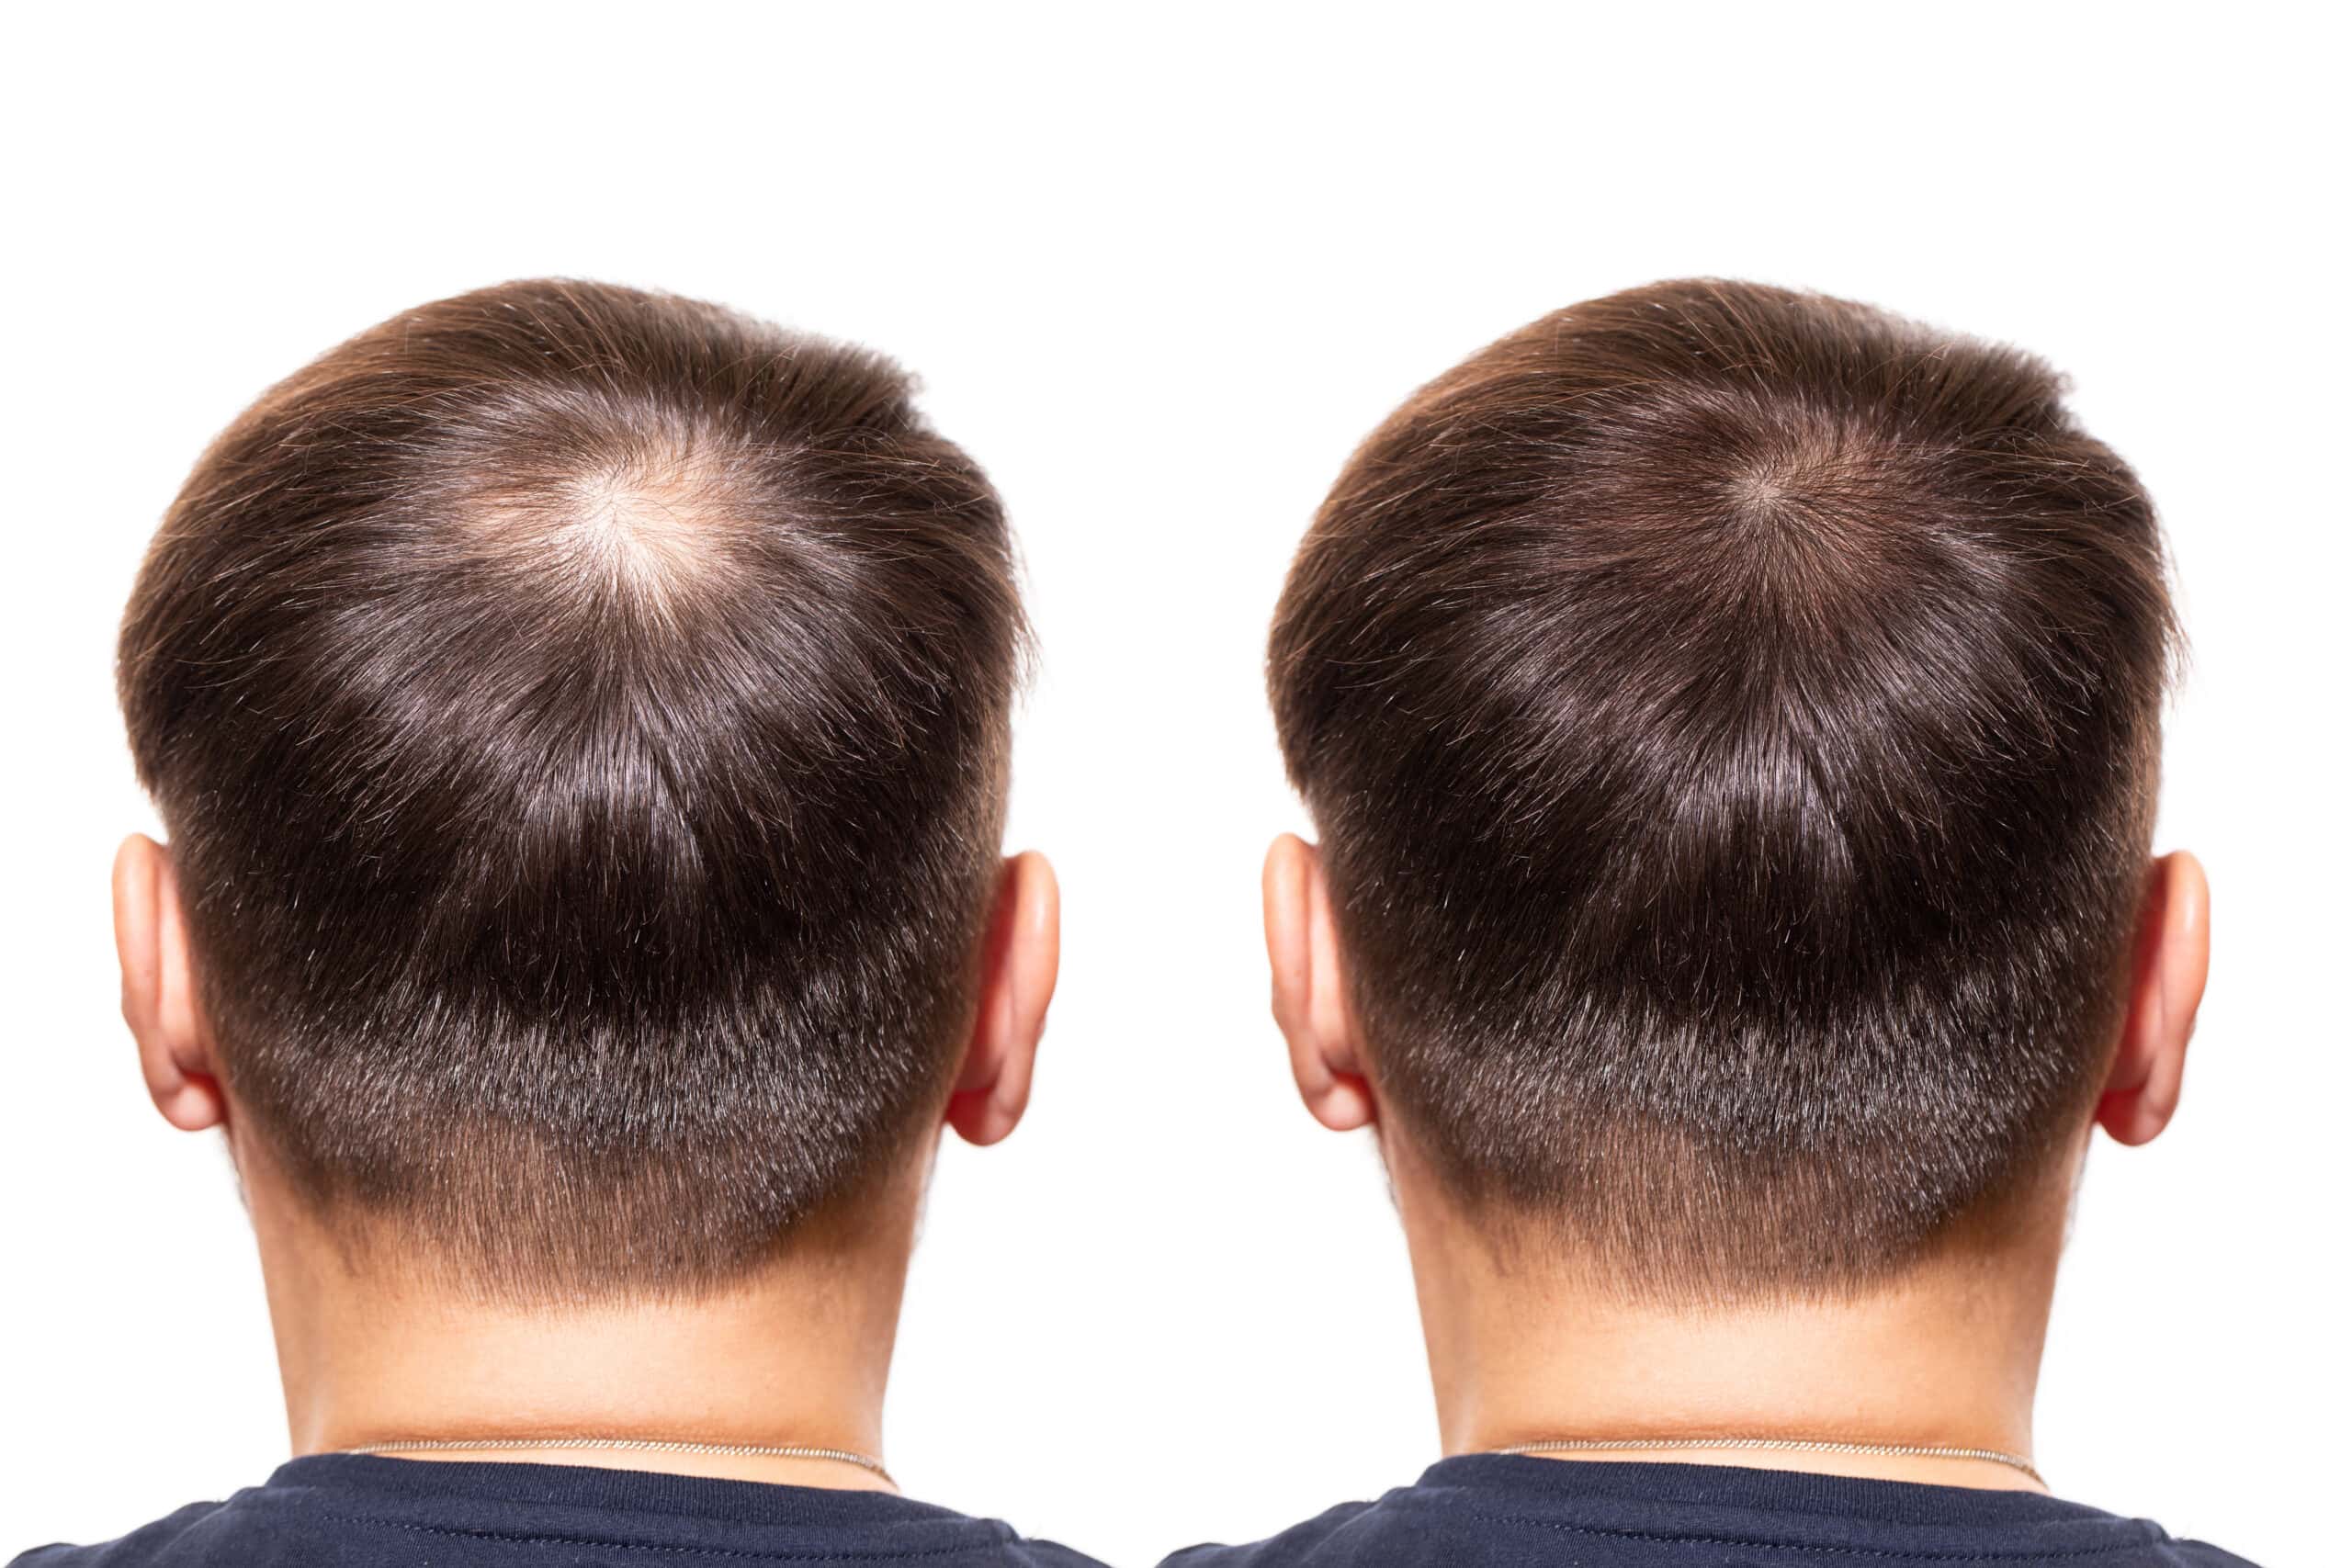 Preventing Hair Loss Review